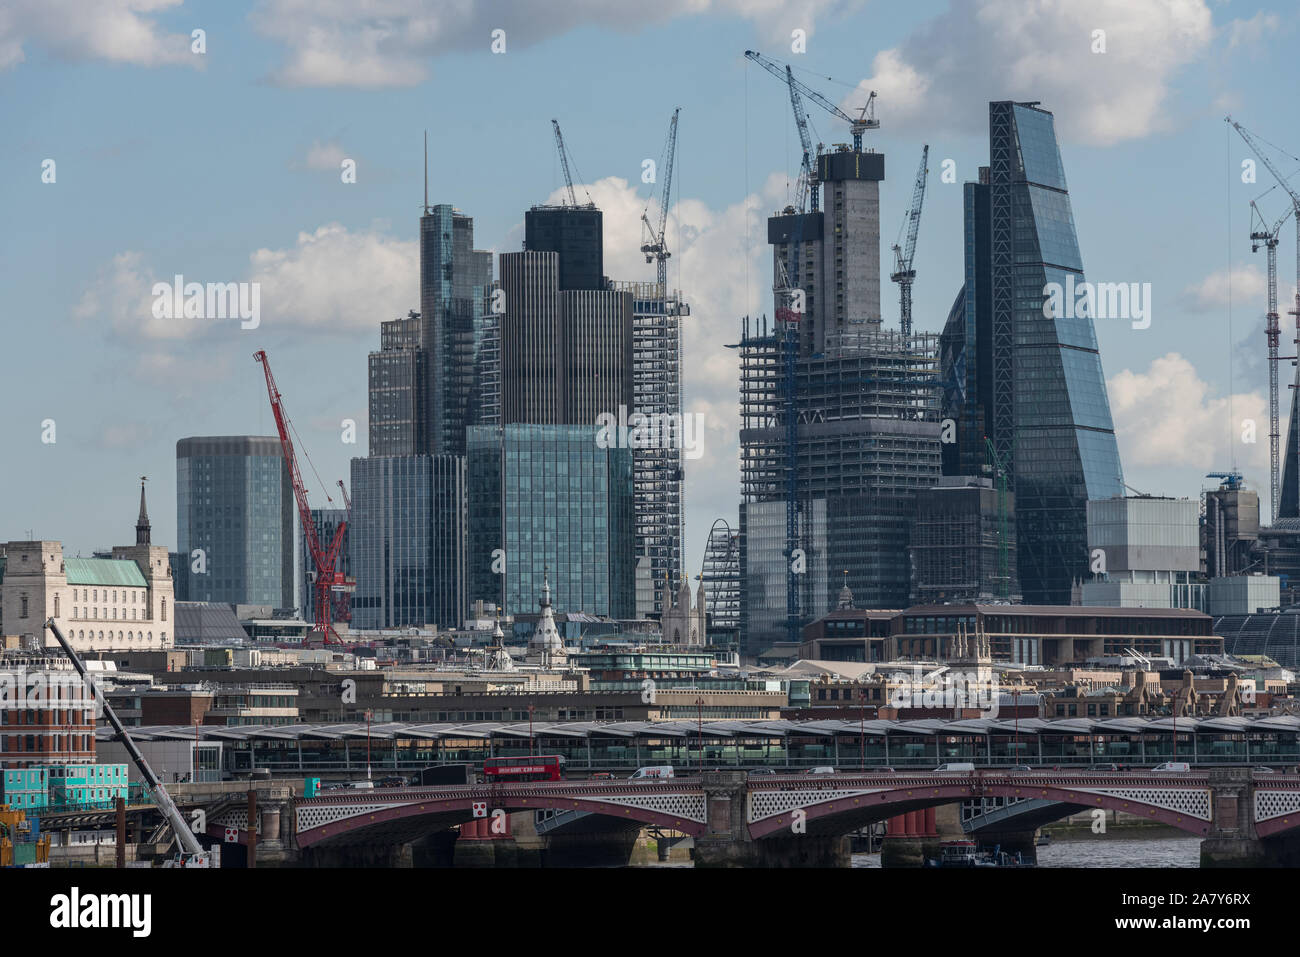 New buildings go up in the Square Mile seen from Waterloo bridge, London, UK. Stock Photo